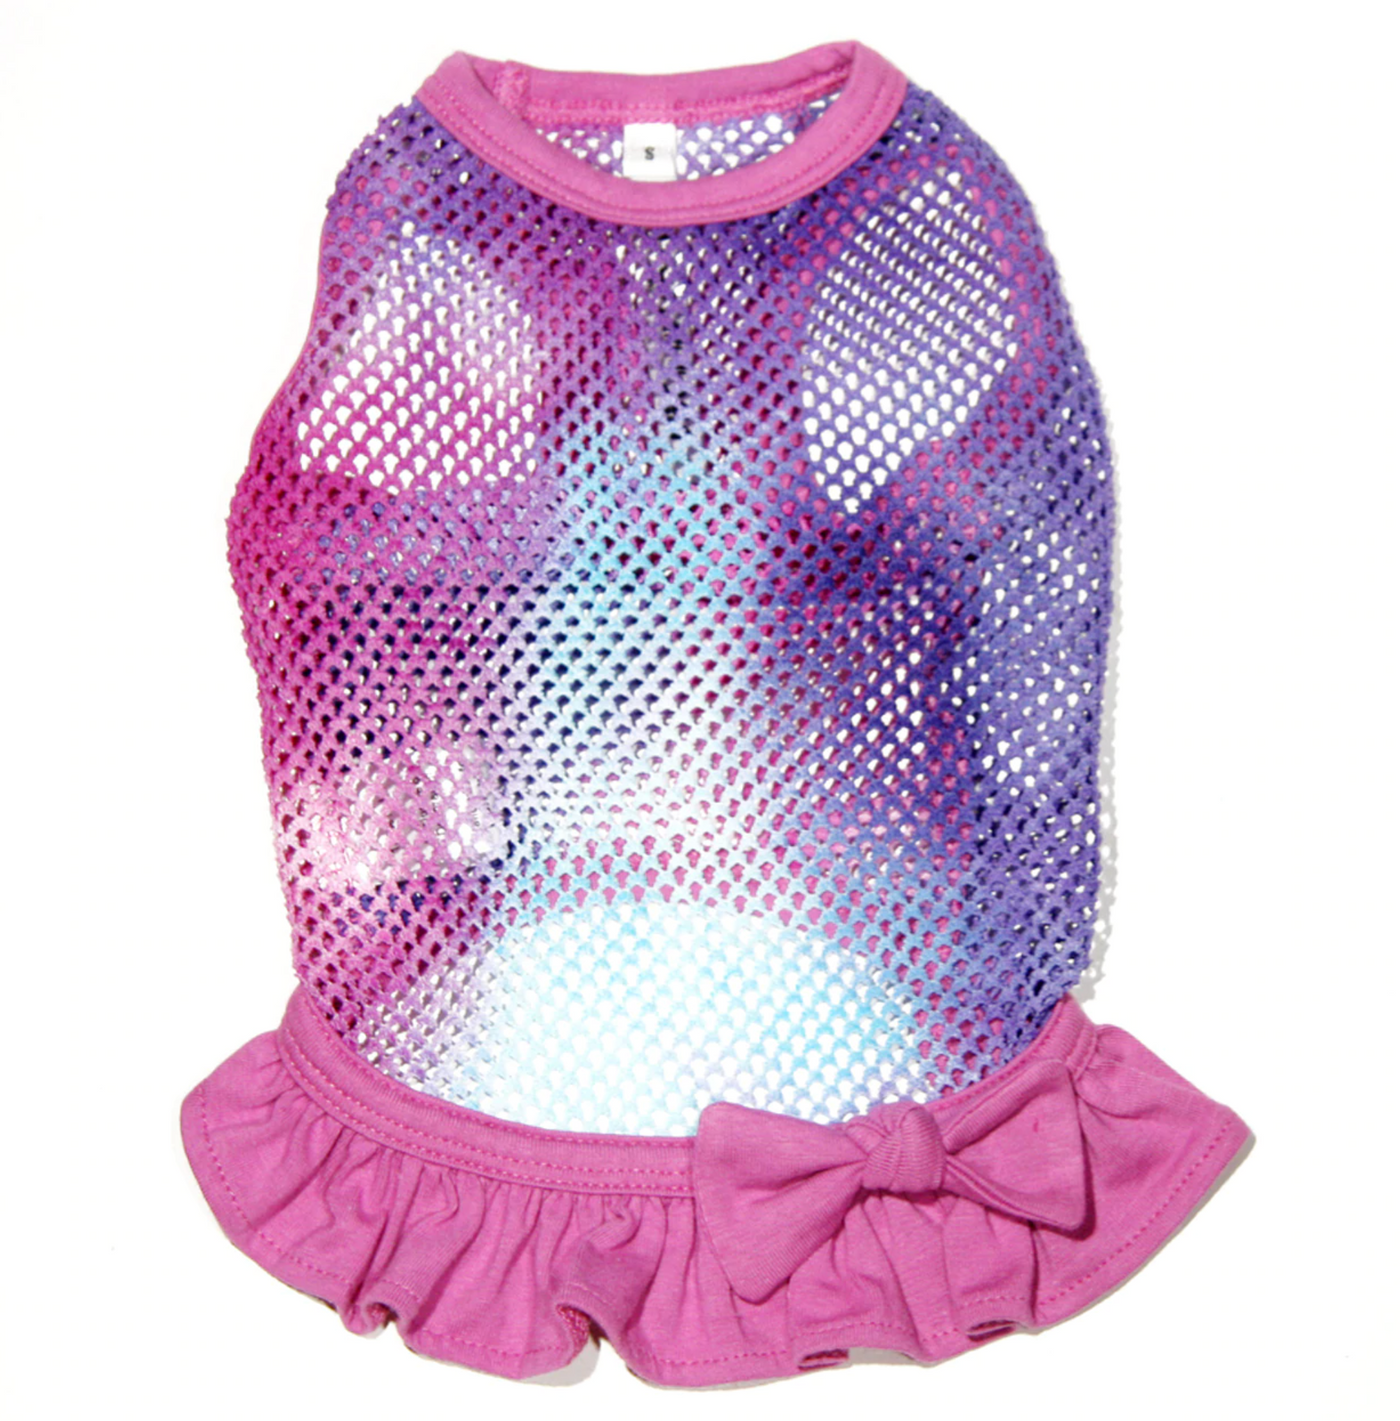 The Peace & Love - Tie Dyed Fishnet Dress